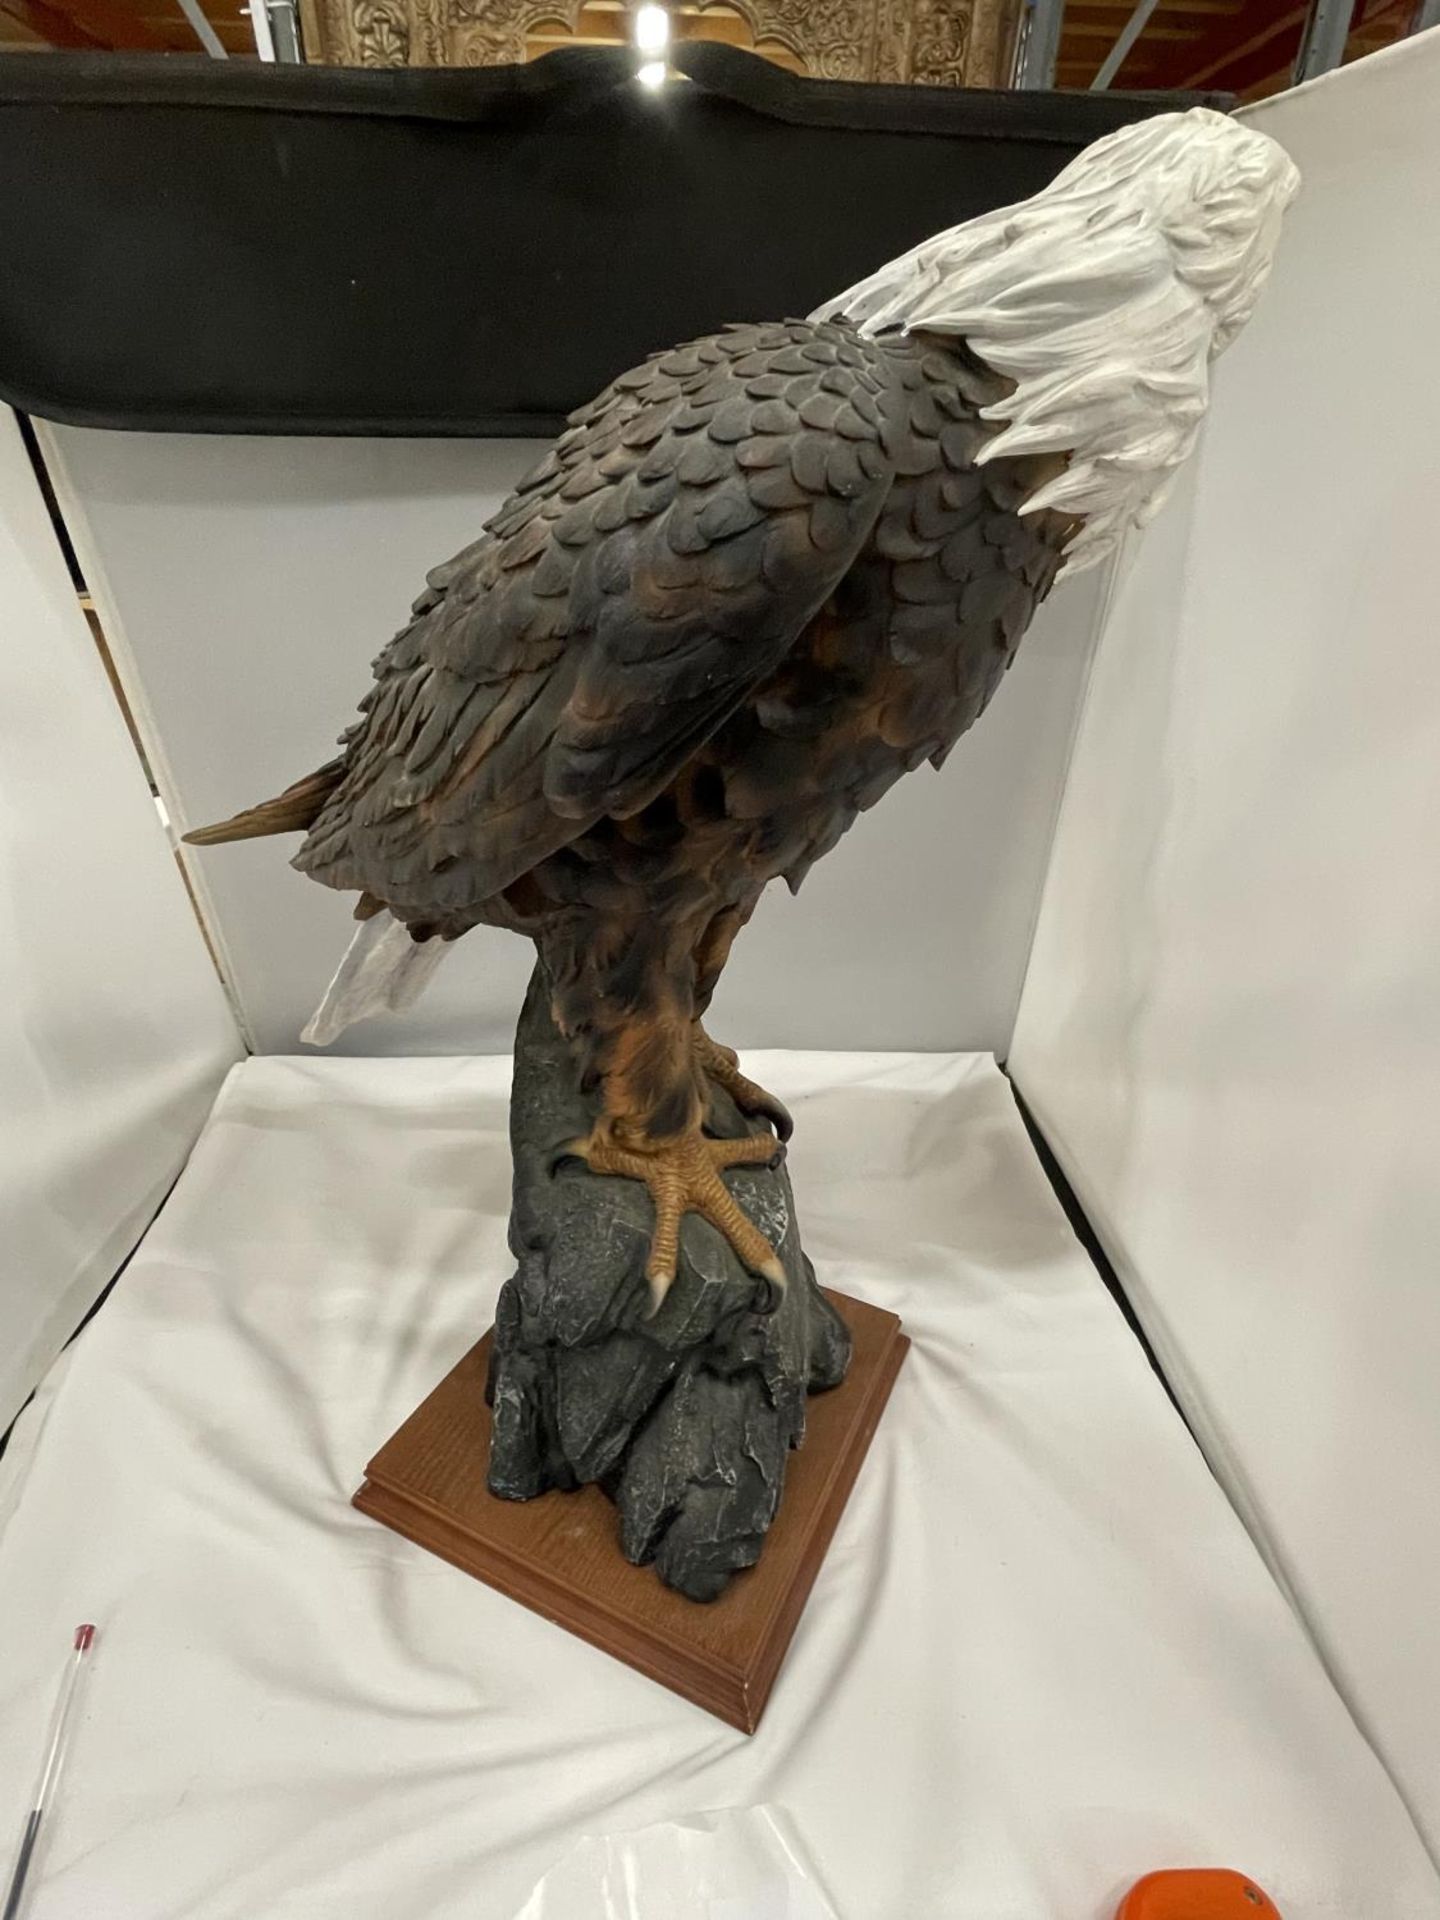 A LARGE RESIN FIGURE OF A BALD EAGLE HEIGHT - Image 3 of 4